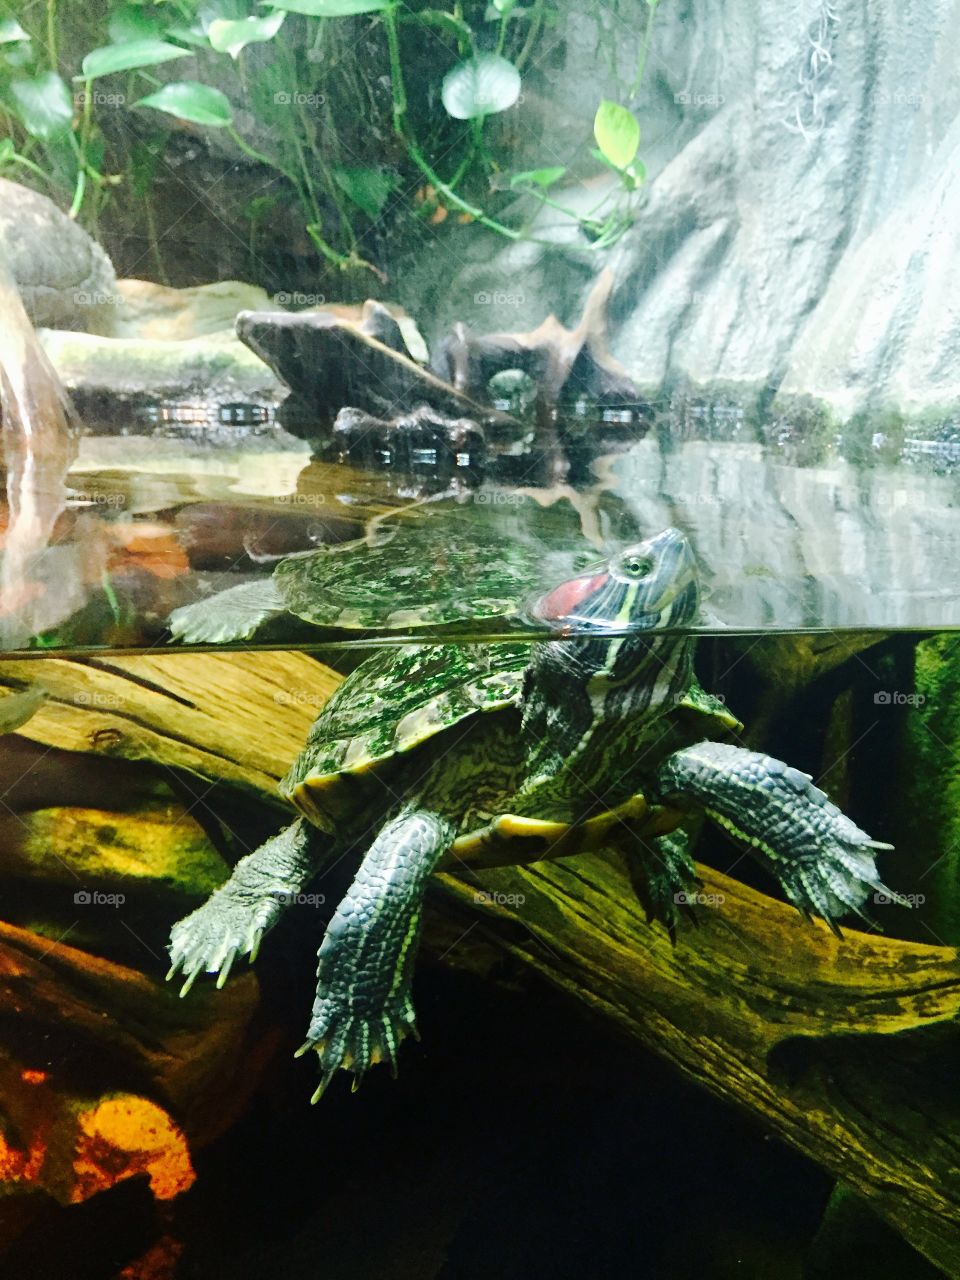 Red eared turtle with head sticking out of water